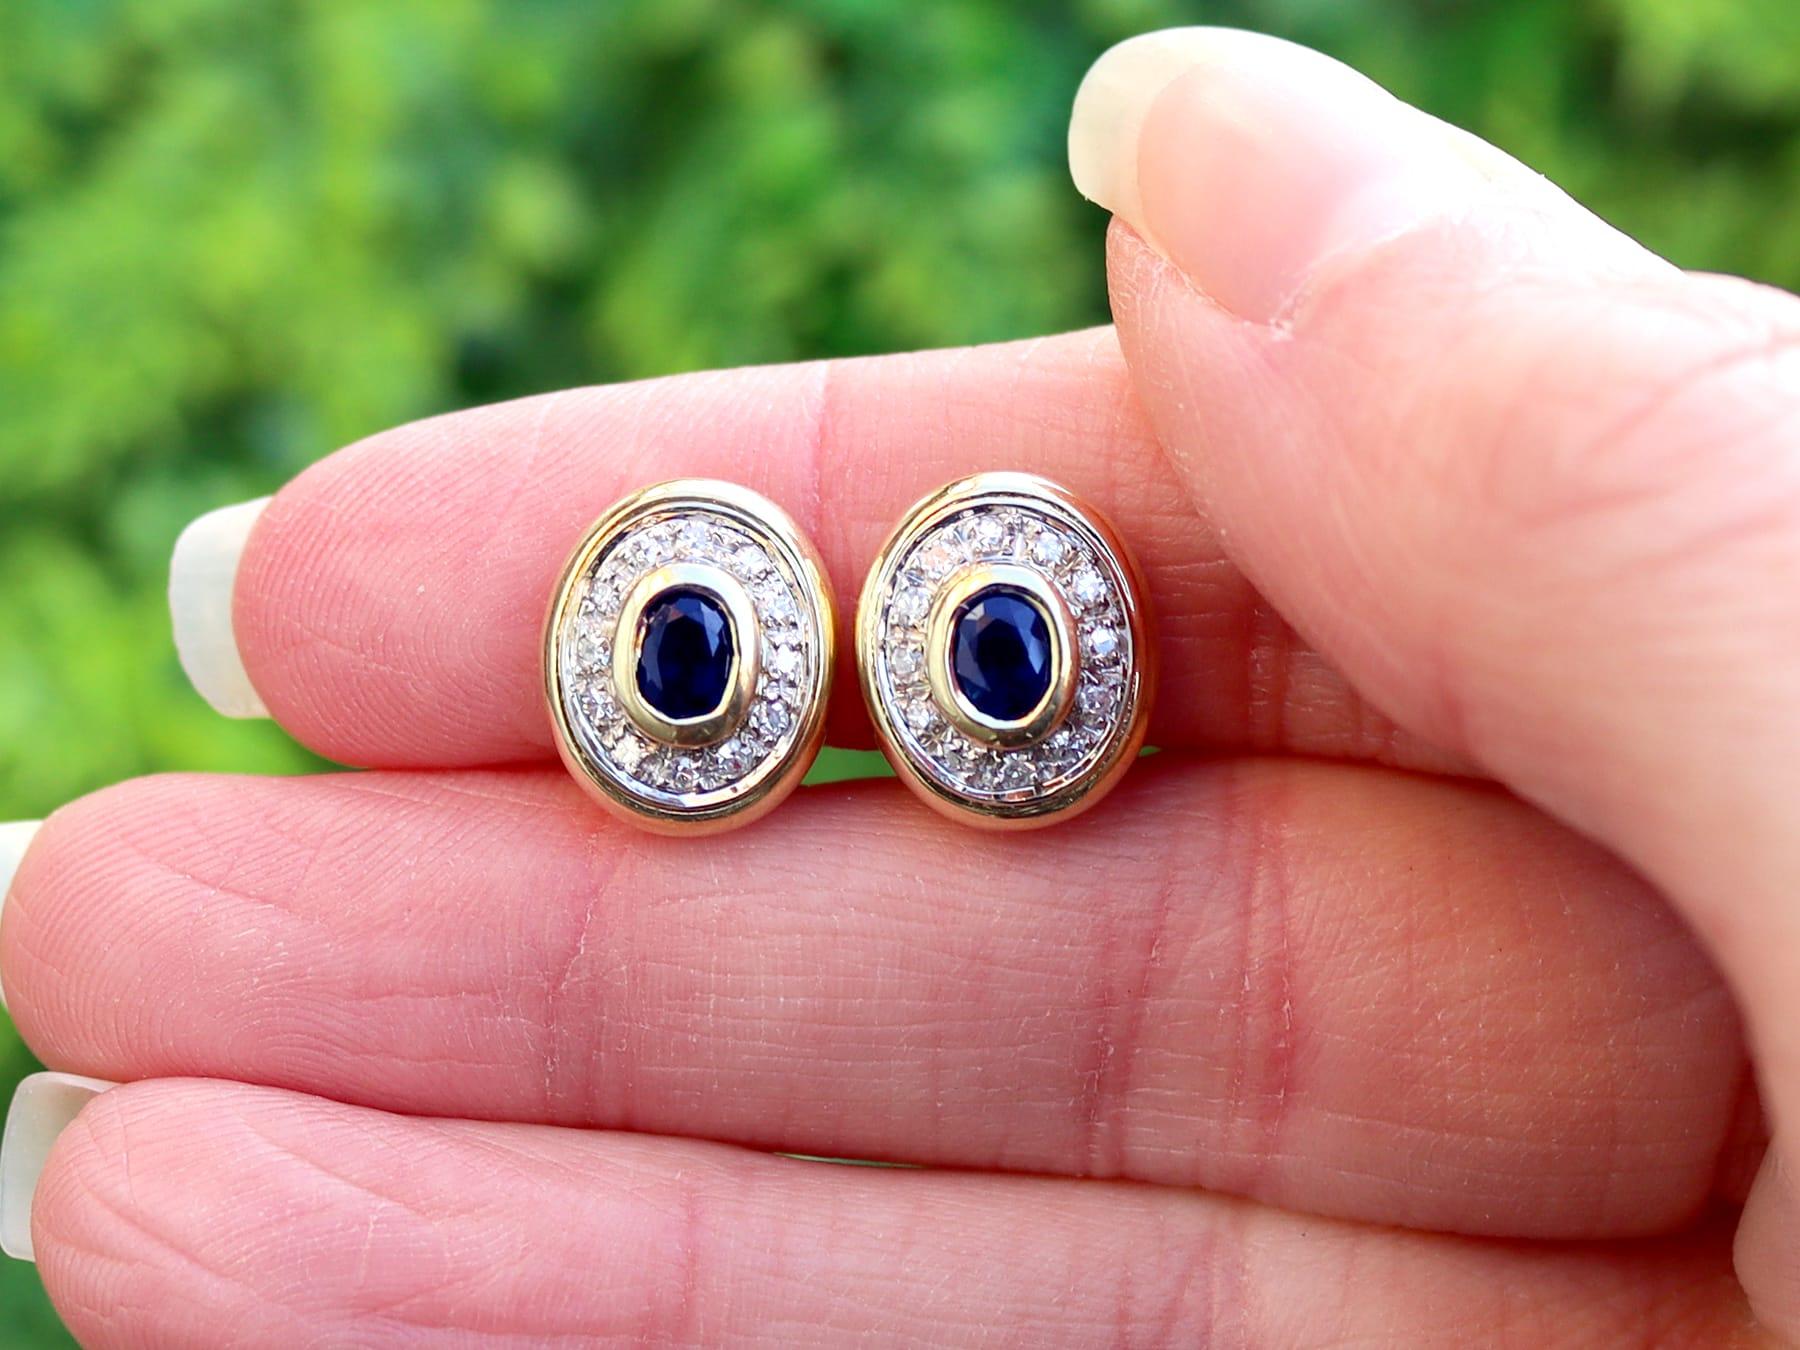 An impressive pair of vintage 0.68 carat sapphire and 0.39 carat diamond, 18 karat yellow and white gold clip-on earrings; part of our diverse gemstone jewelry collections

These fine and impressive sapphire and diamond earrings have been crafted in